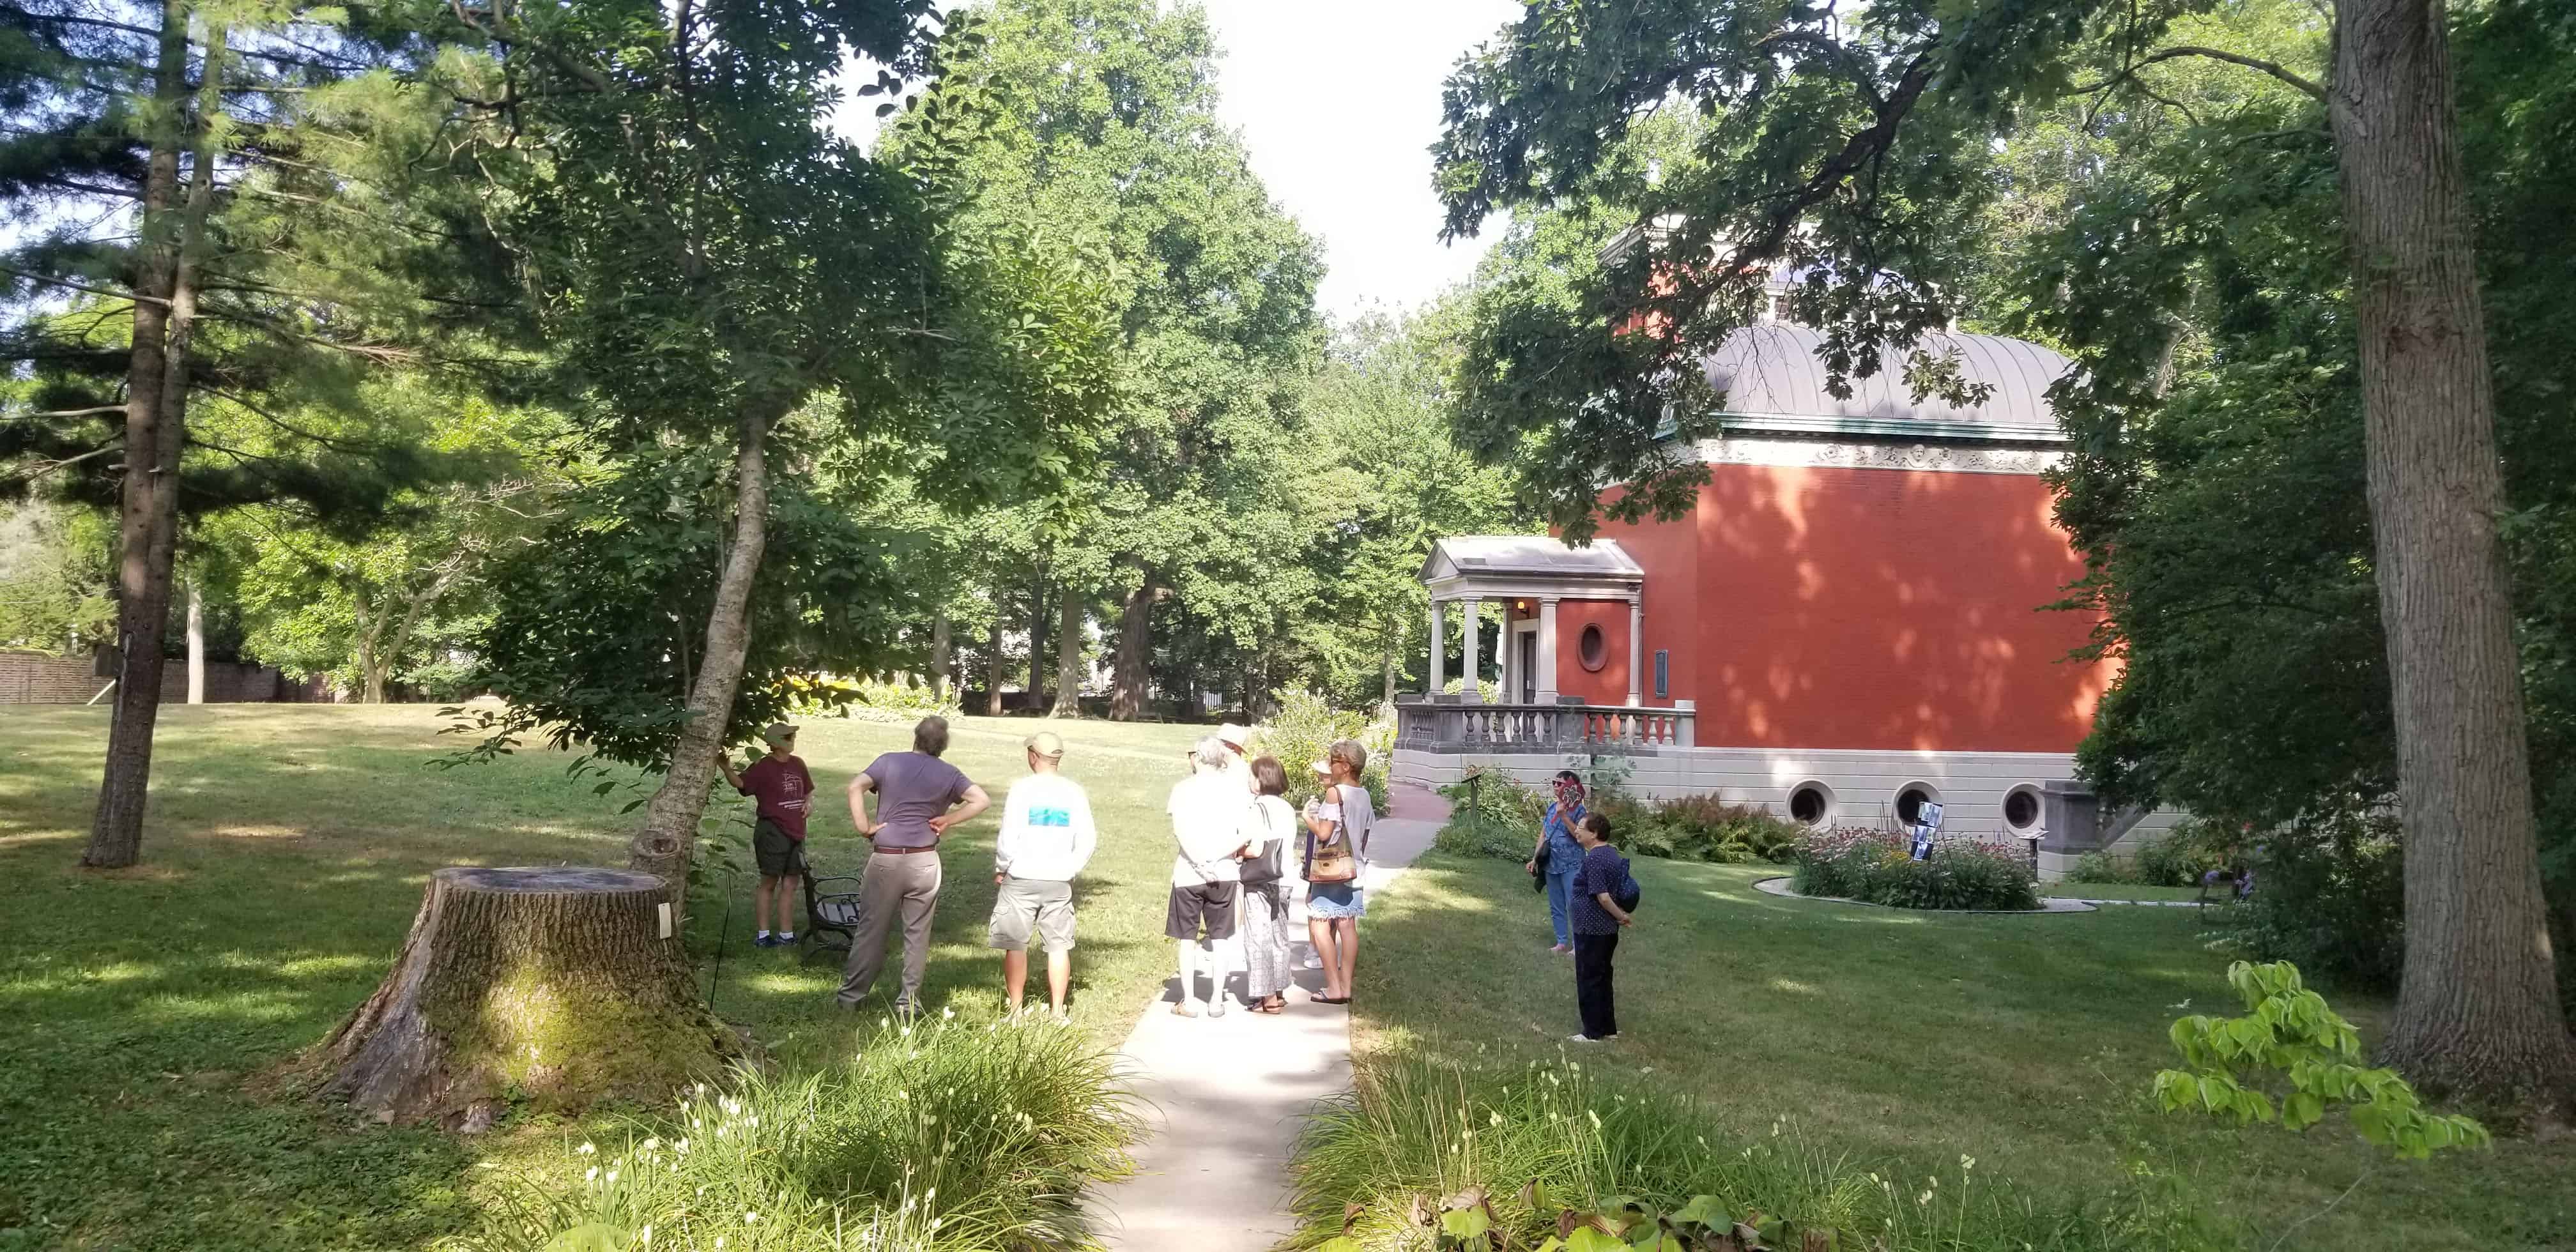 Visitors participate in a Garden Tour of the Study grounds